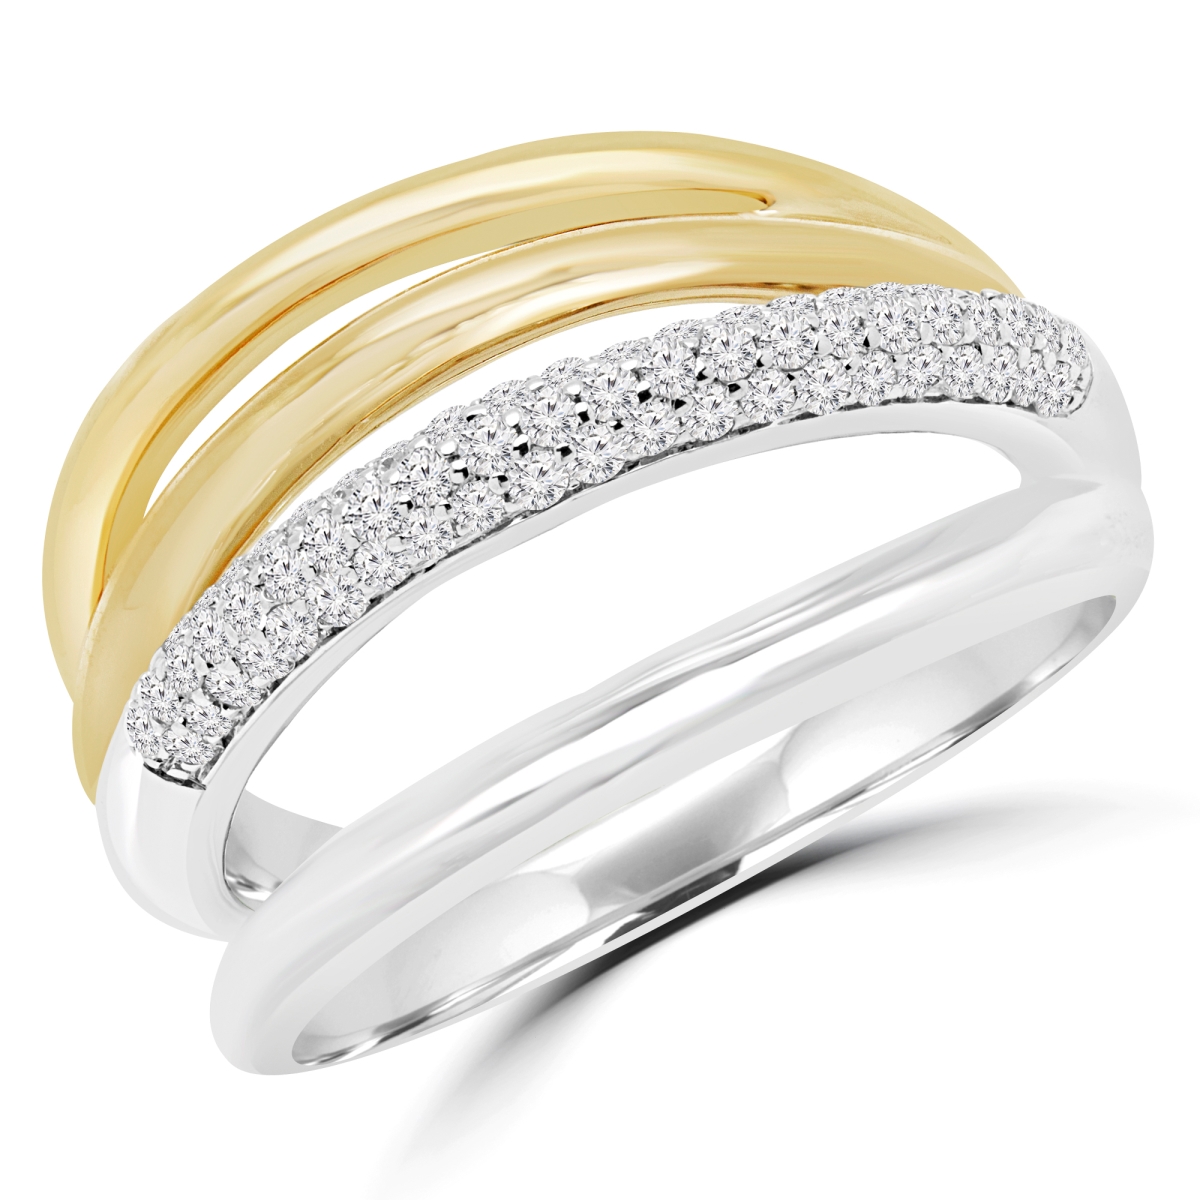 Picture of Majesty Diamonds MDR170050-6.75 0.37 CTW Round Diamond Cocktail Semi-Eternity Ring in 14K Two-Tone Gold - 6.75